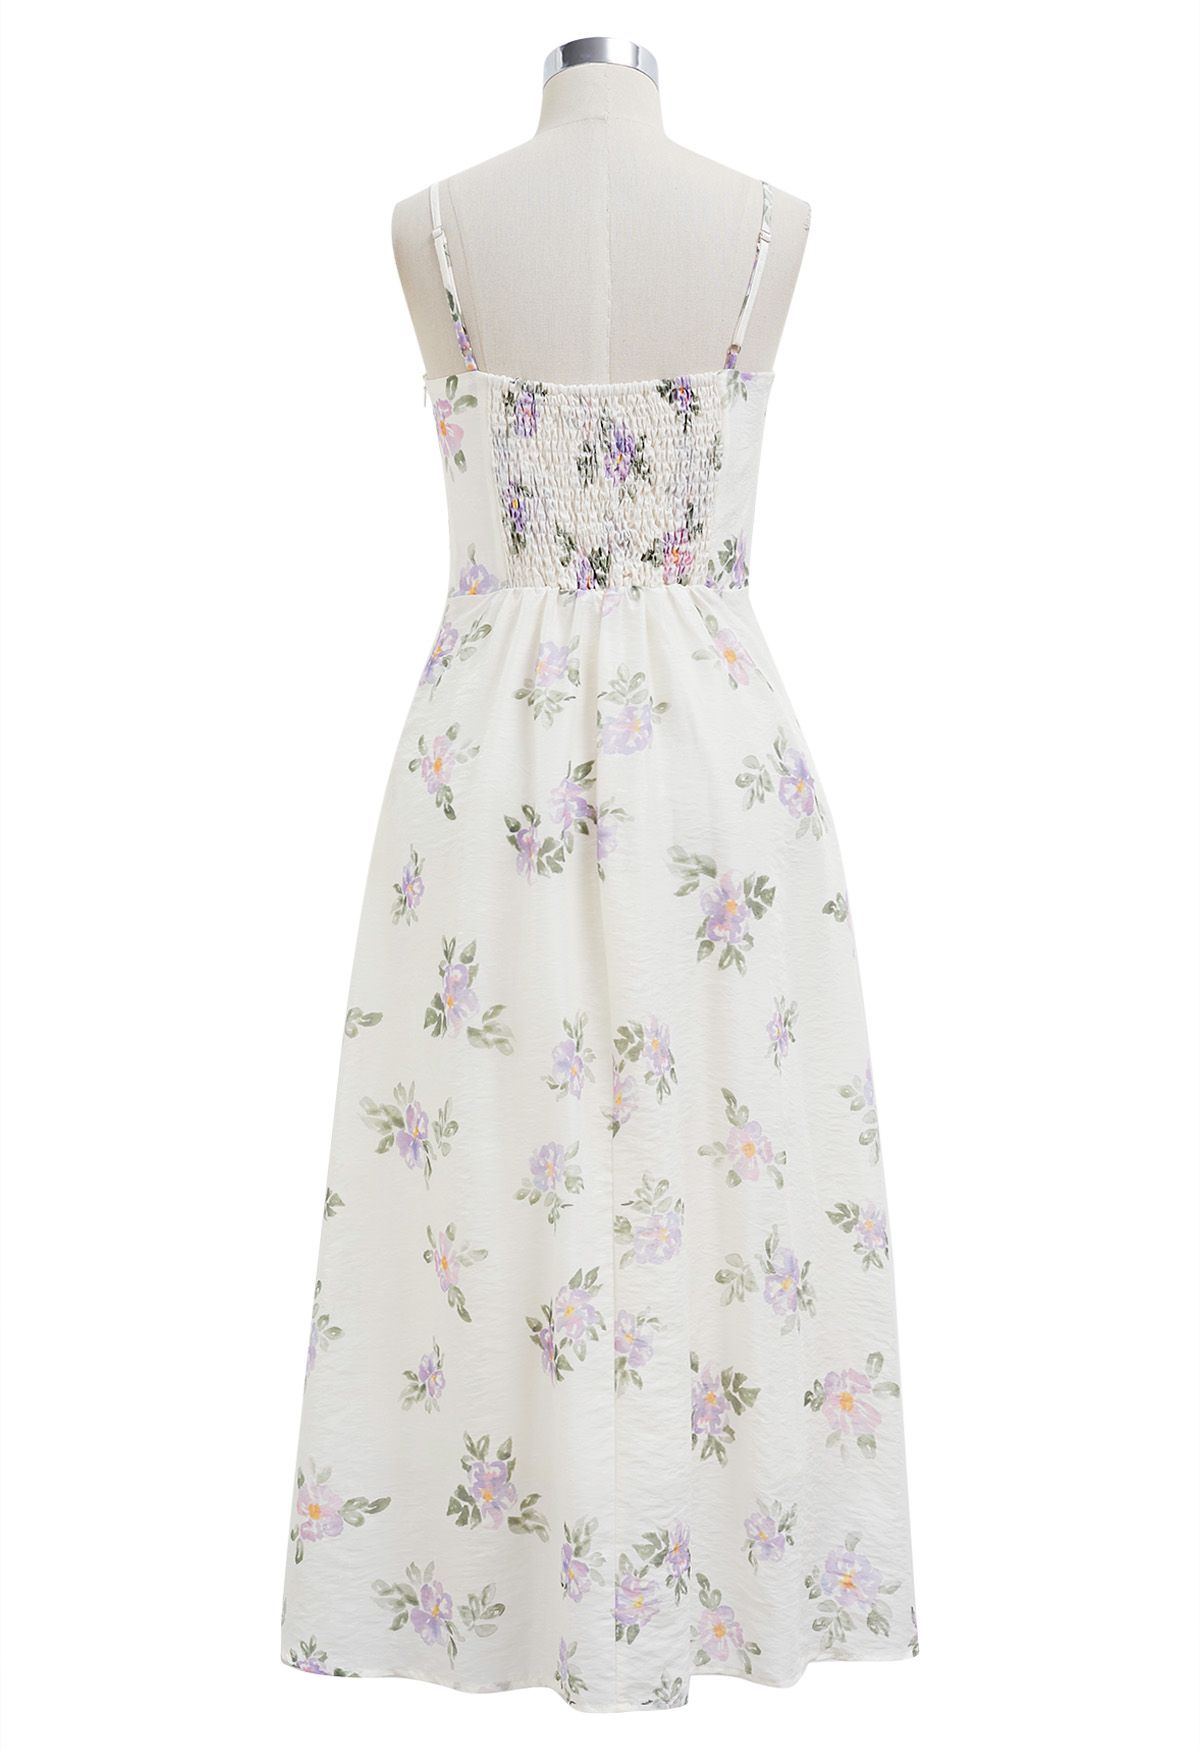 Watercolor Floral Ruffle Trim Cami Dress in Lilac